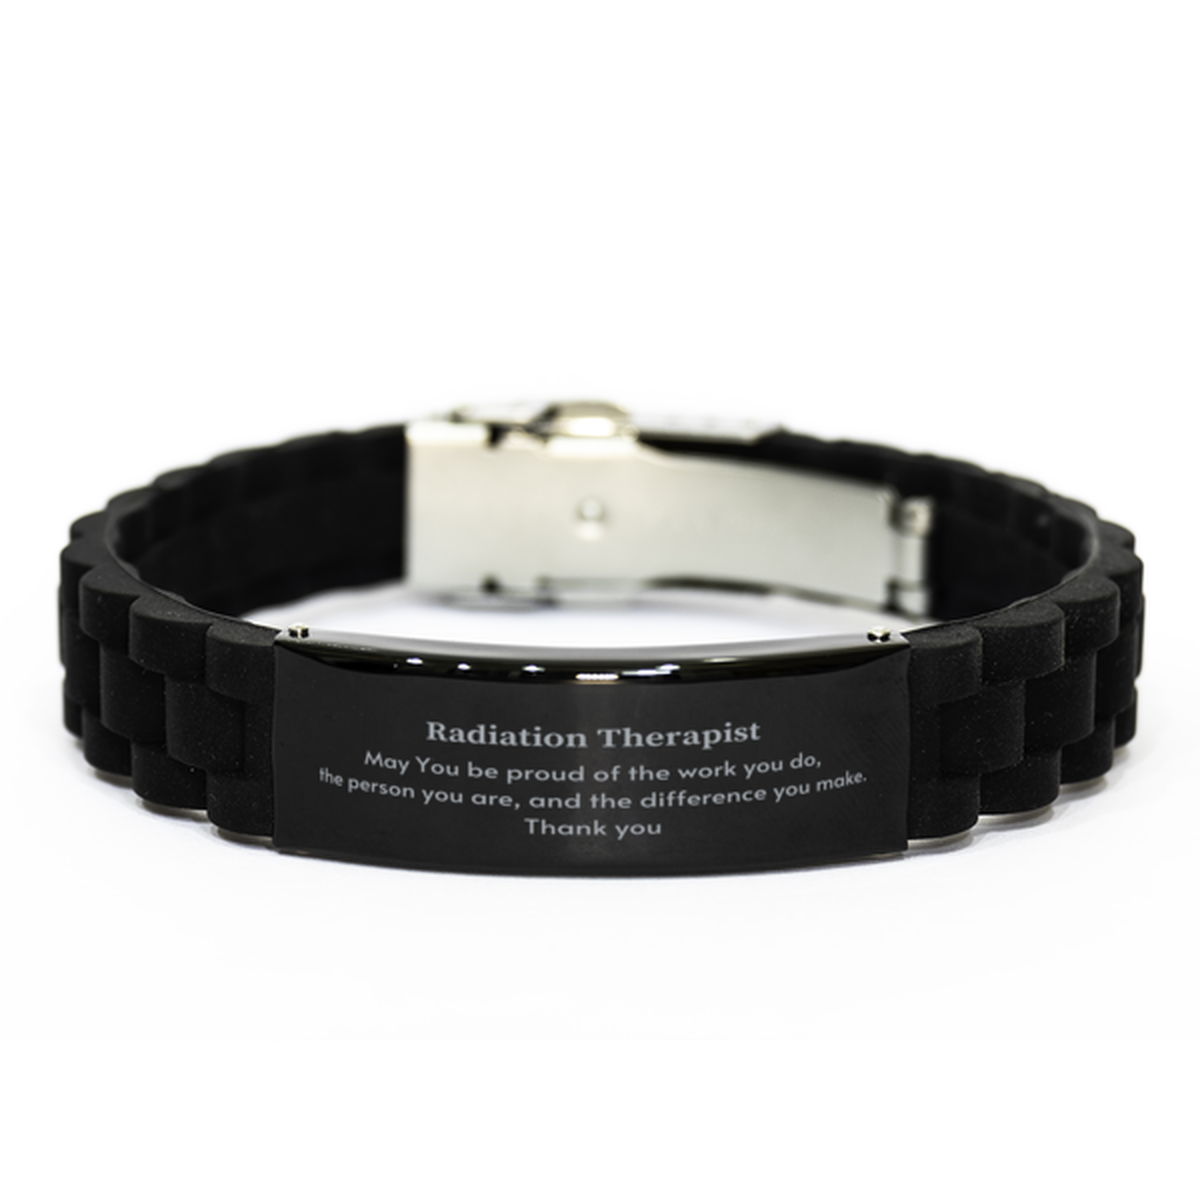 Heartwarming Black Glidelock Clasp Bracelet Retirement Coworkers Gifts for Radiation Therapist, Radiation Therapist May You be proud of the work you do, the person you are Gifts for Boss Men Women Friends